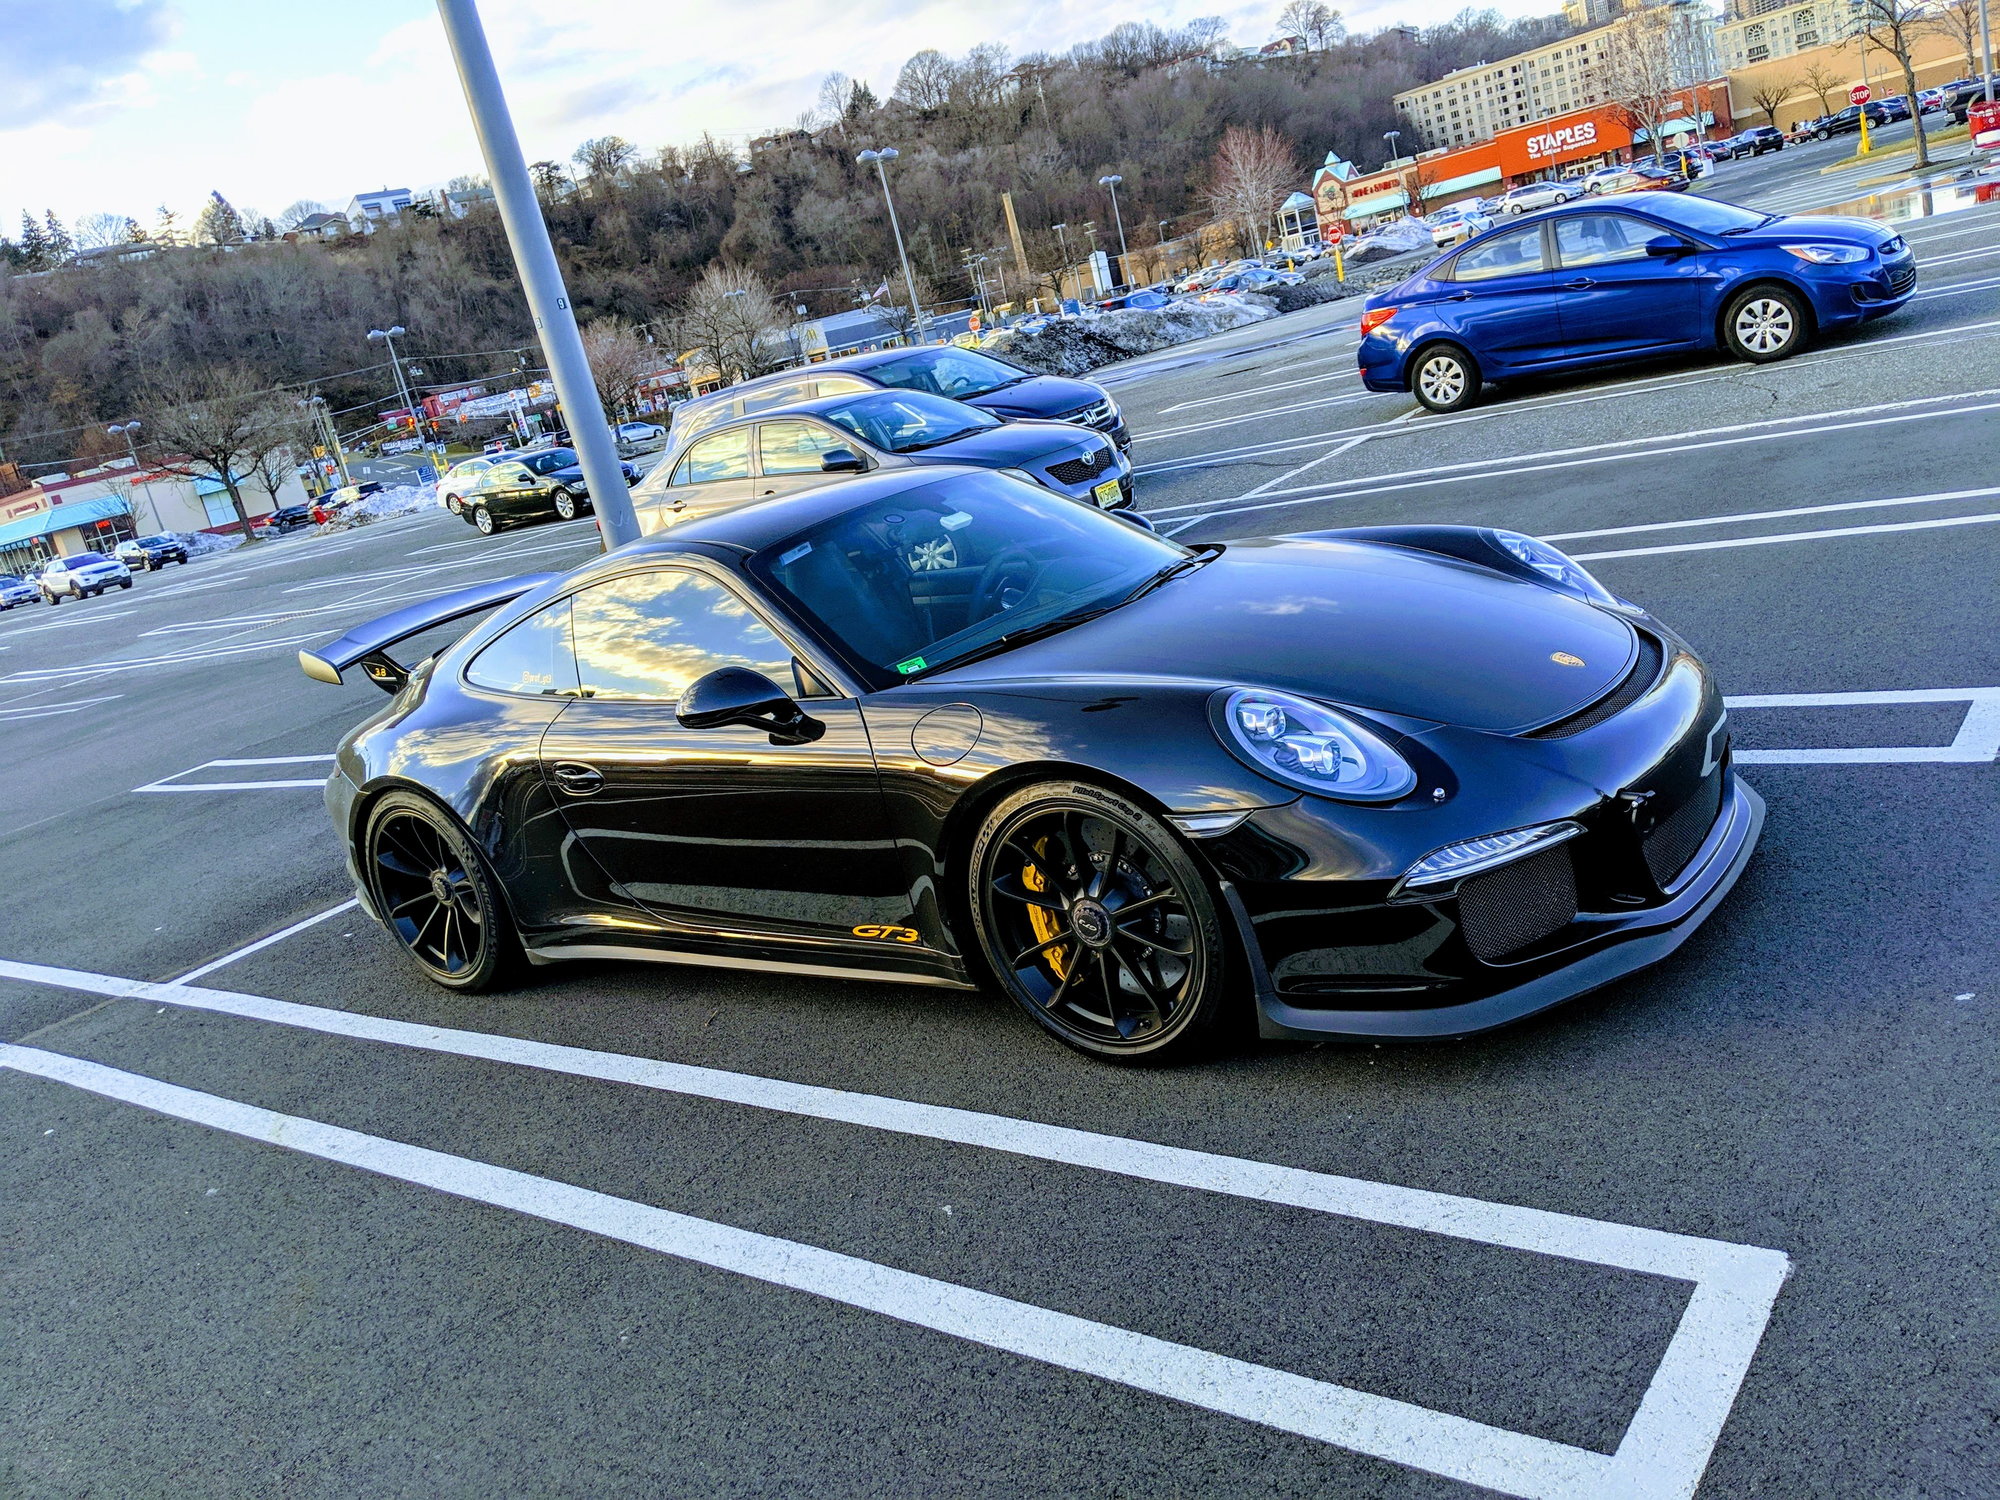 2014 Porsche GT3 - CPO 991.1 Porsche GT3 -black on black- PCCBs & new engine - Used - VIN WP0AC2A96ES183601 - 31,700 Miles - 6 cyl - 2WD - Automatic - Coupe - Black - Weehawken, NJ 07086, United States